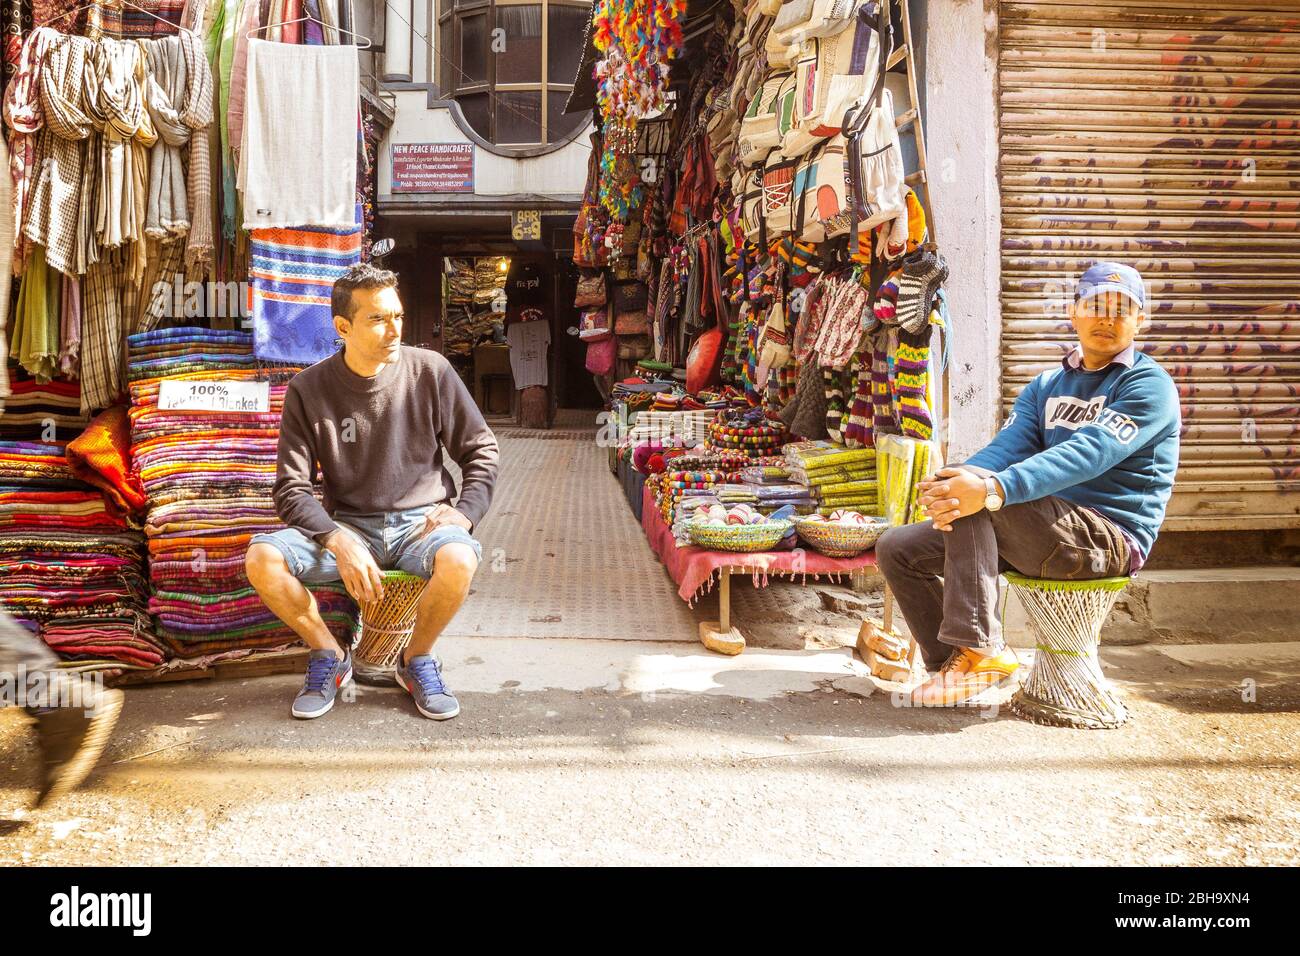 Street vendor in Kathmandu, two men about 30 years old Stock Photo